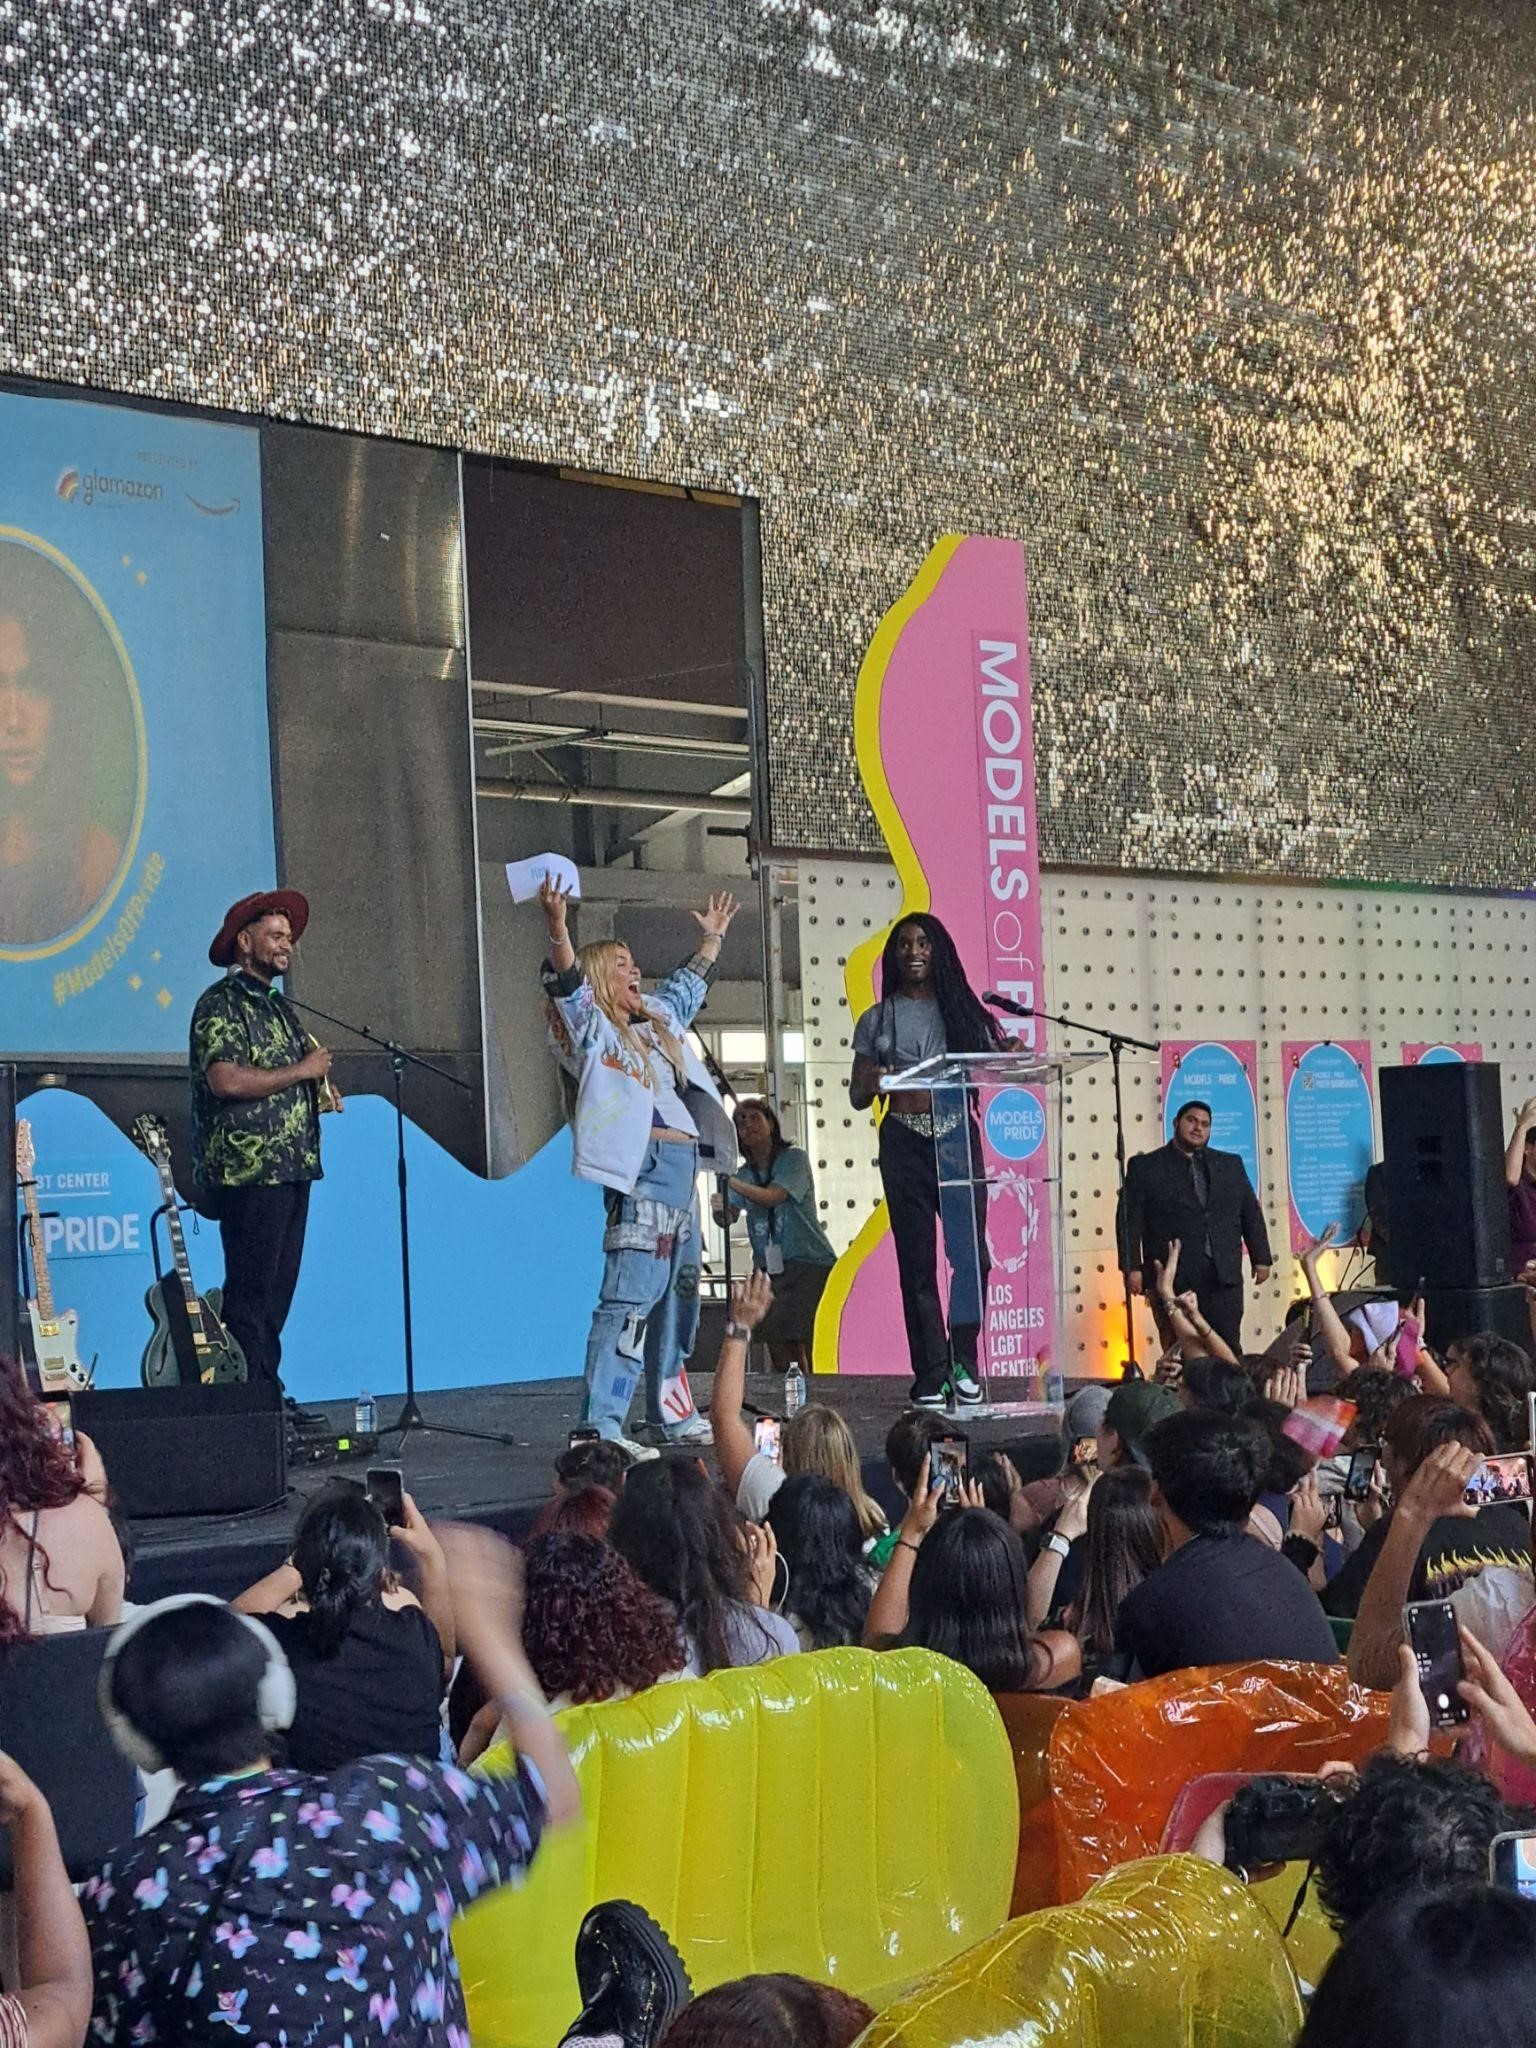 also for monday article: A photograph of Hayley Kiyoko, a white and Japanese woman with tan skin, in a denim outfit on a stage. She has her arms raised in the air. On stage with her are a Black masc person in a brown hat and green shirt and a Black person with long black hair in a gray outfit. Behind her, the wall has a blue wave design. At the bottom of the stage, the audience members raise their hands excitedly.